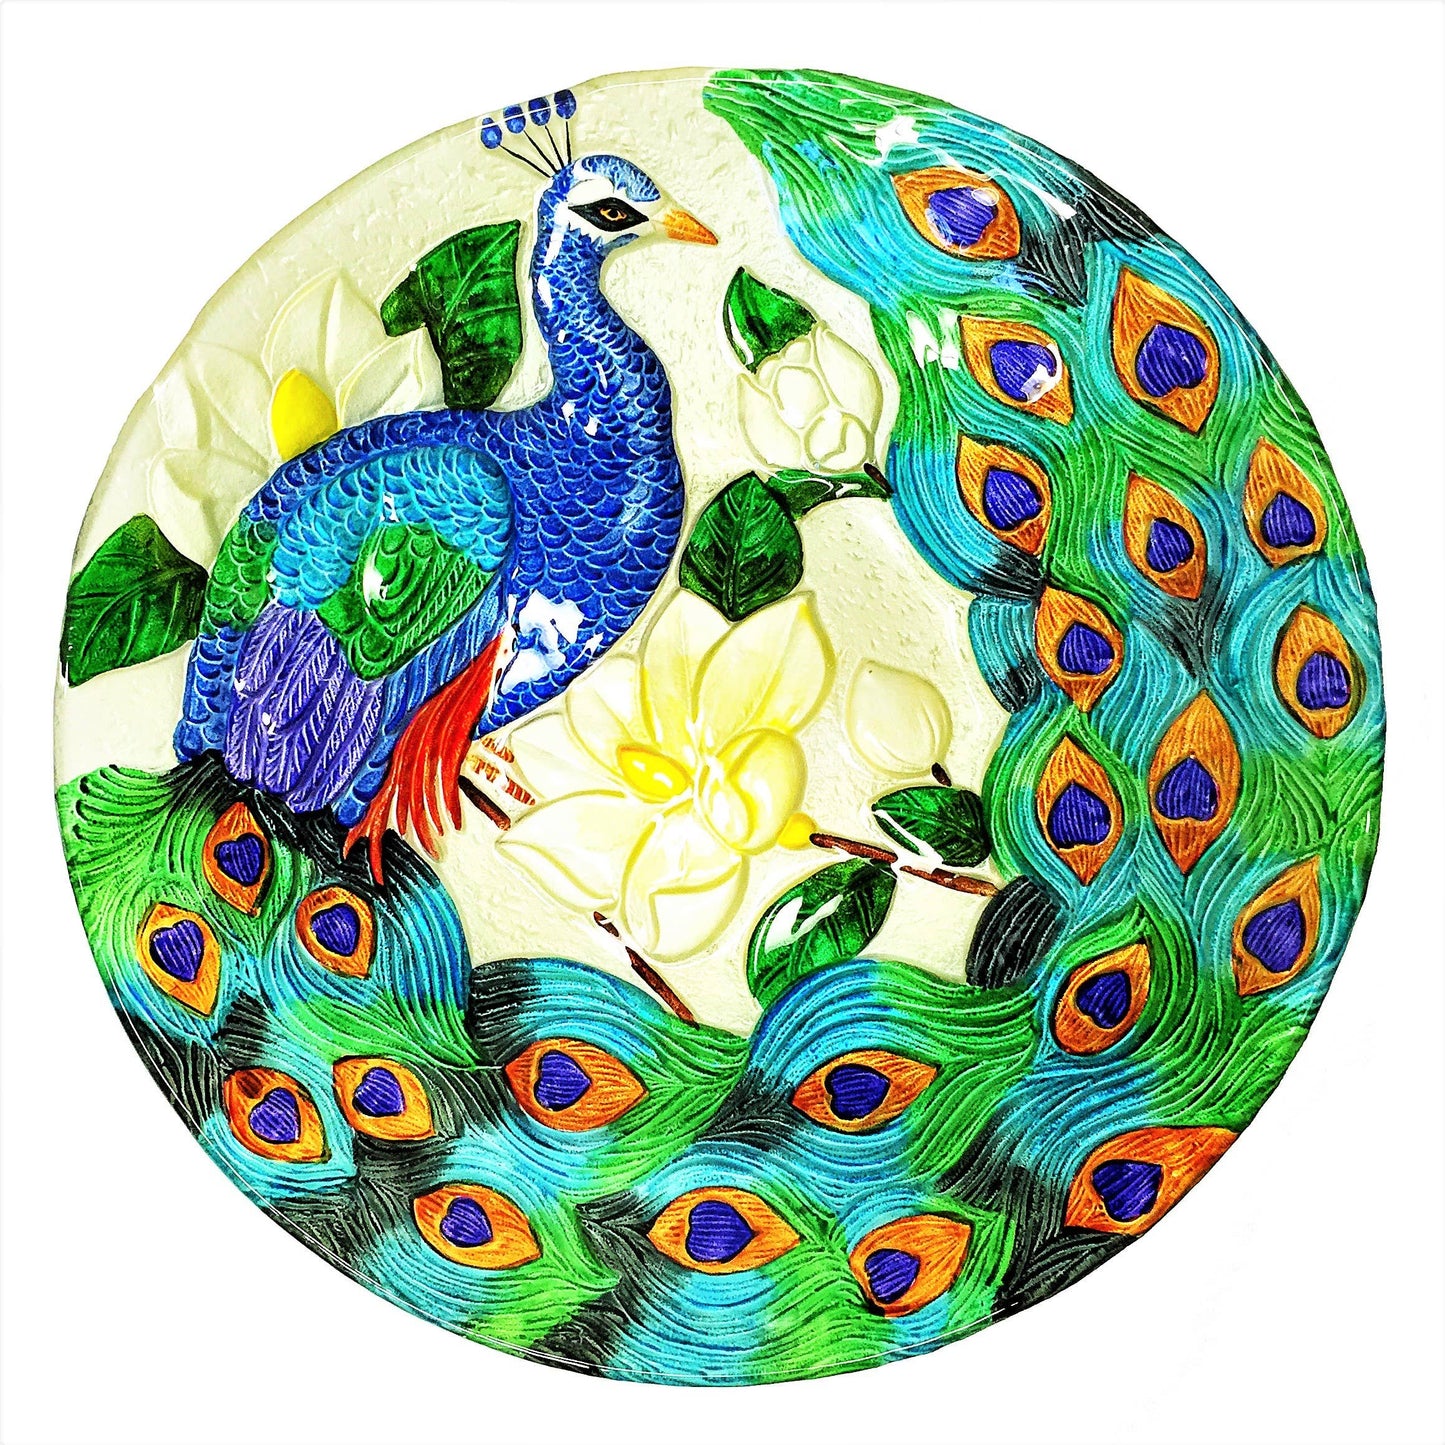 18" Hand Painted Peacock Glass Bowl